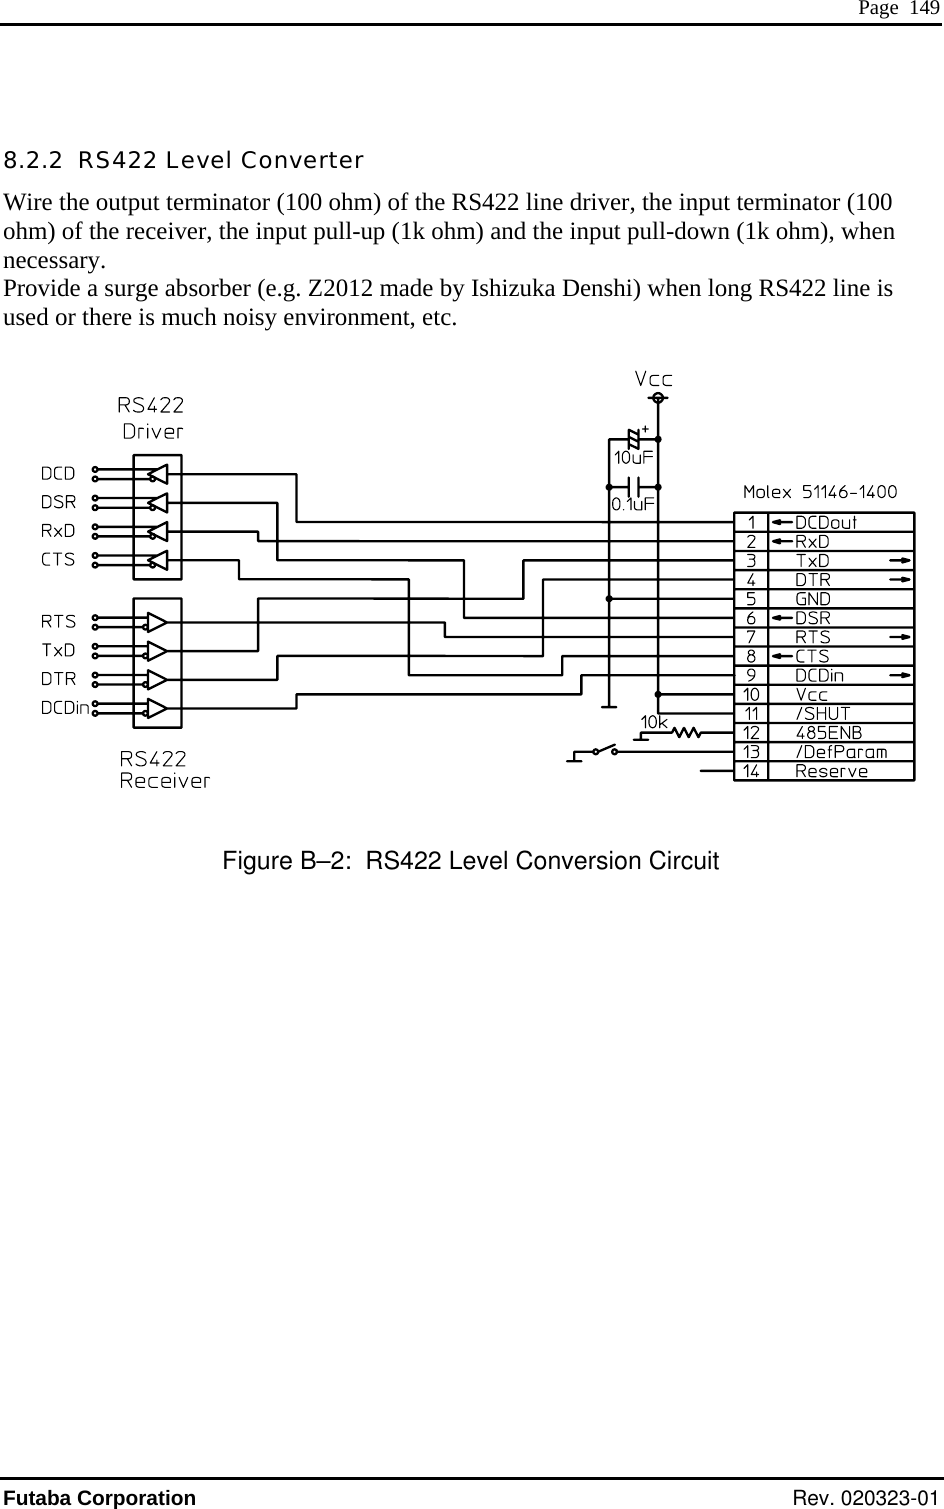  Page  149  8.2.2  RS422 Level Converter ire the output terminator (100 ohmWo) of the RS422 line driver, the input terminator (100 hm) of the receiver, the input pull-up (1k ohm) and the input pull-down (1k ohm), when by Ishizuka Denshi) when long RS422 line is necessary. Provide a surge absorber (e.g. Z2012 made used or there is much noisy environment, etc.    Figure B–2:  RS422 Level Conversion Circuit Futaba Corporation Rev. 020323-01 